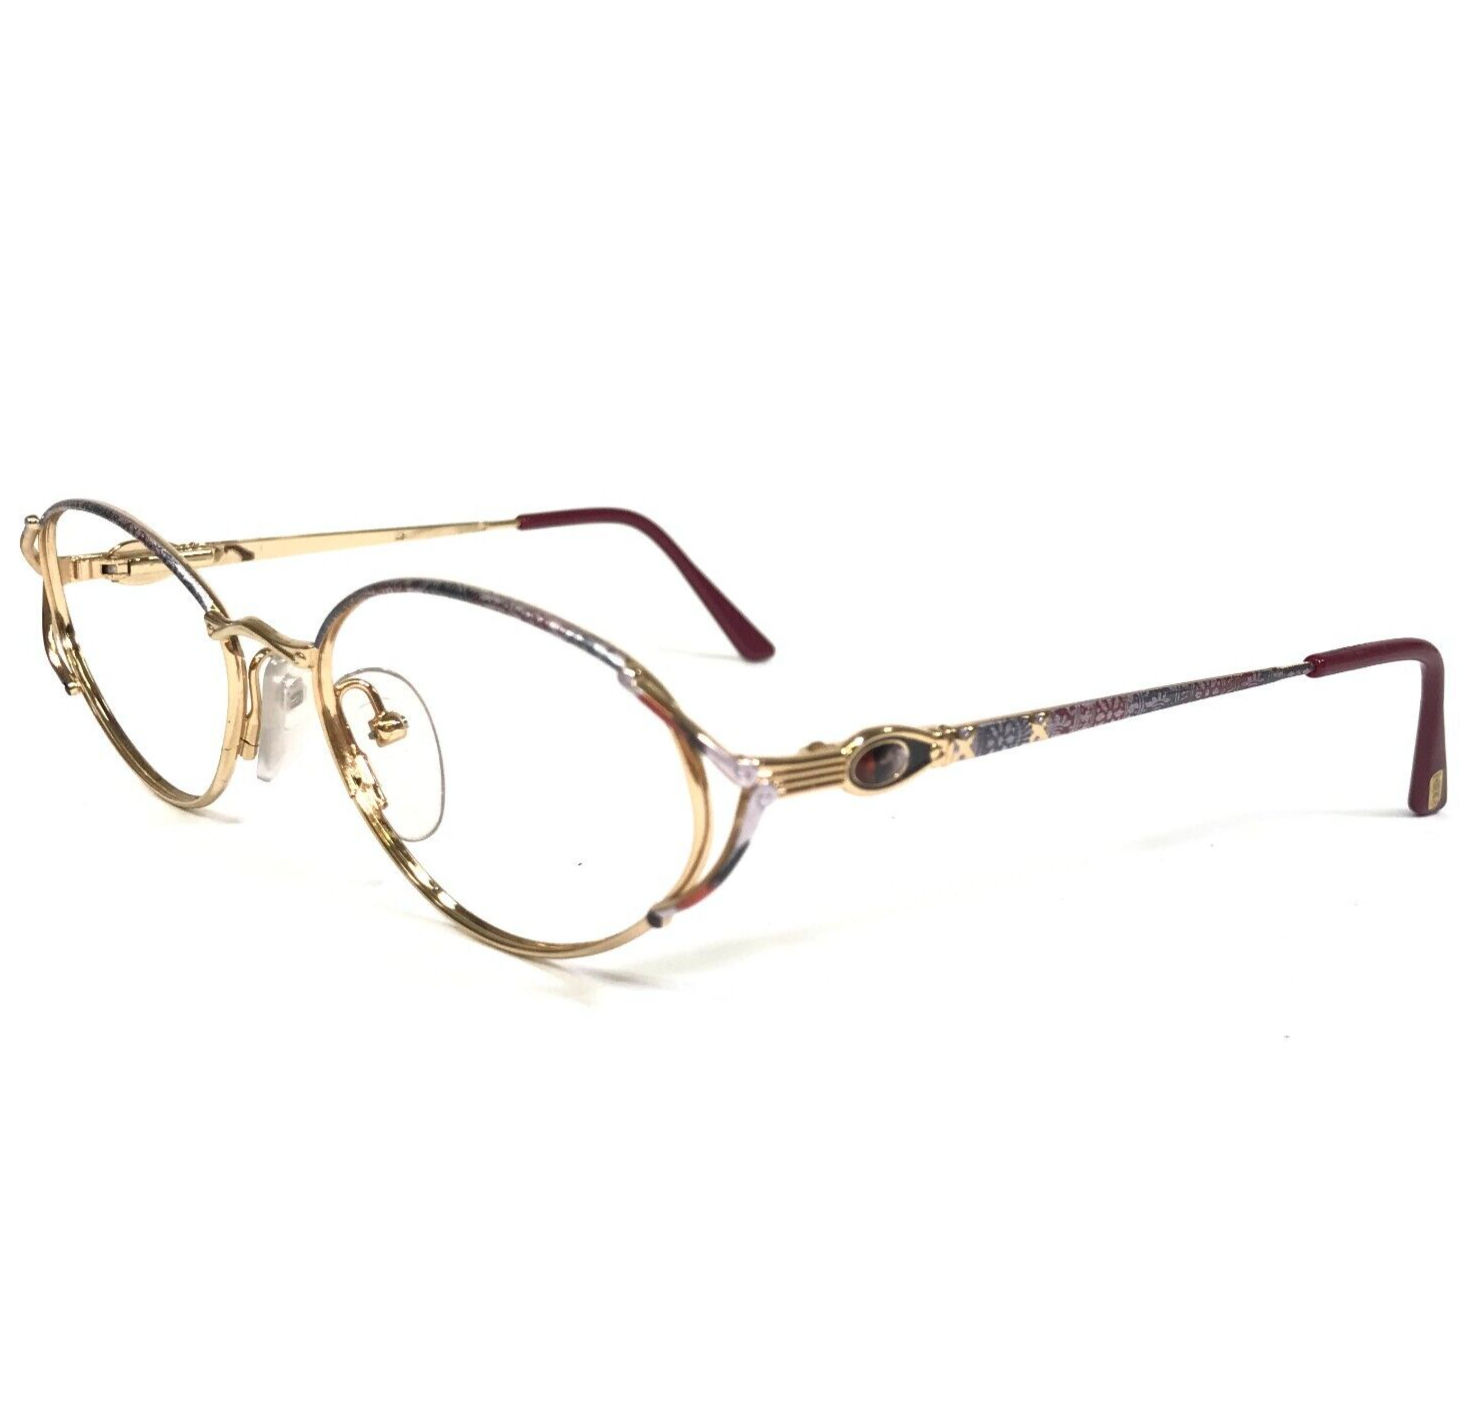 Primary image for Faberge Eyeglasses Frames Red Gold Round Rainbow Full Wire Rim 52-18-125